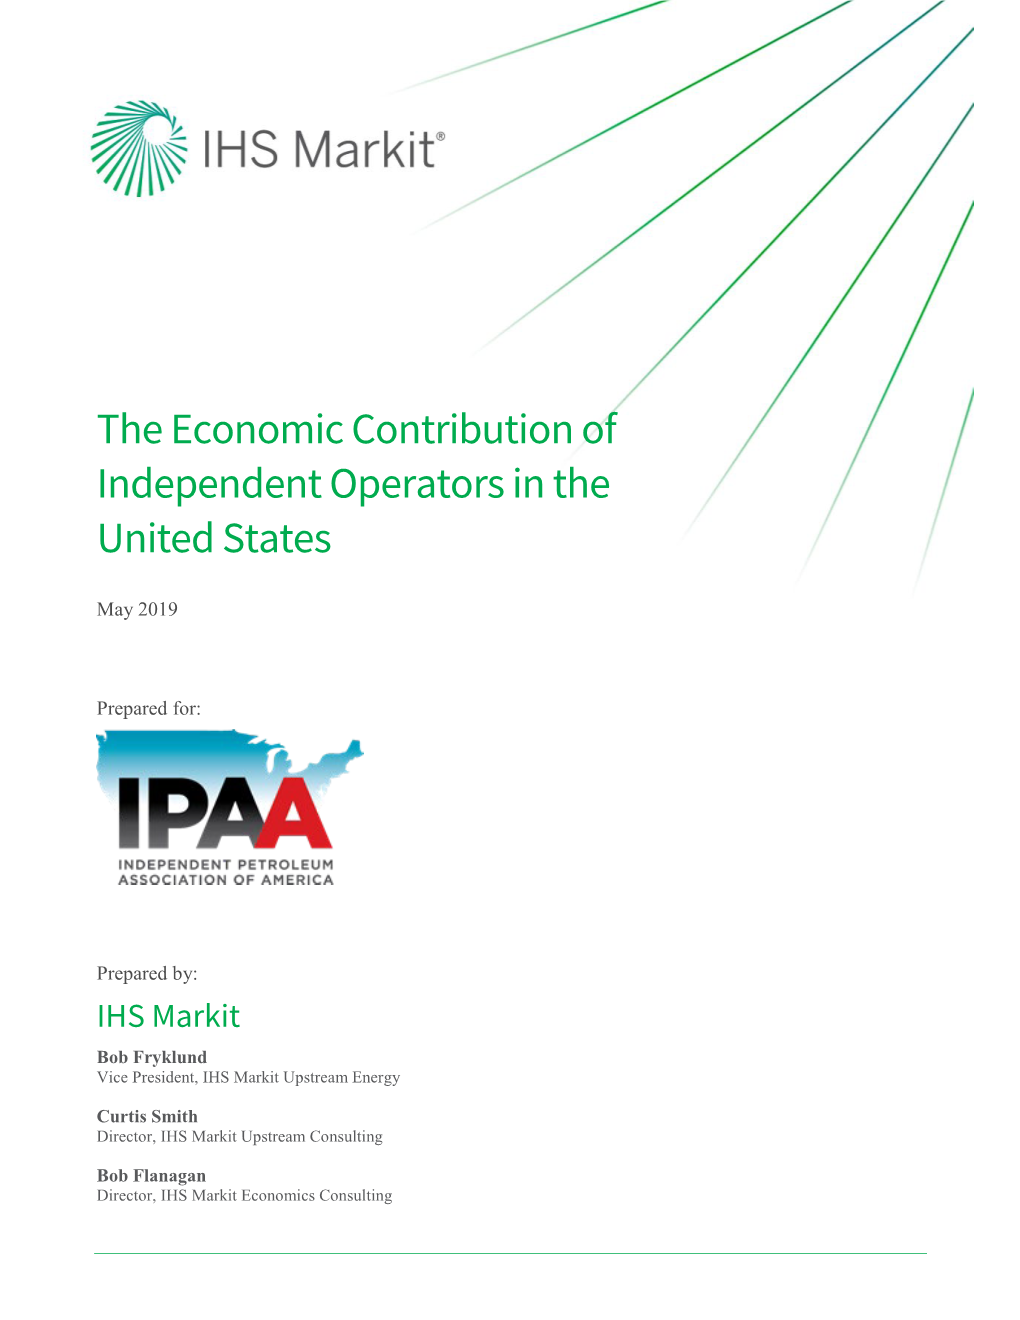 The Economic Contribution of Independent Operators in the United States